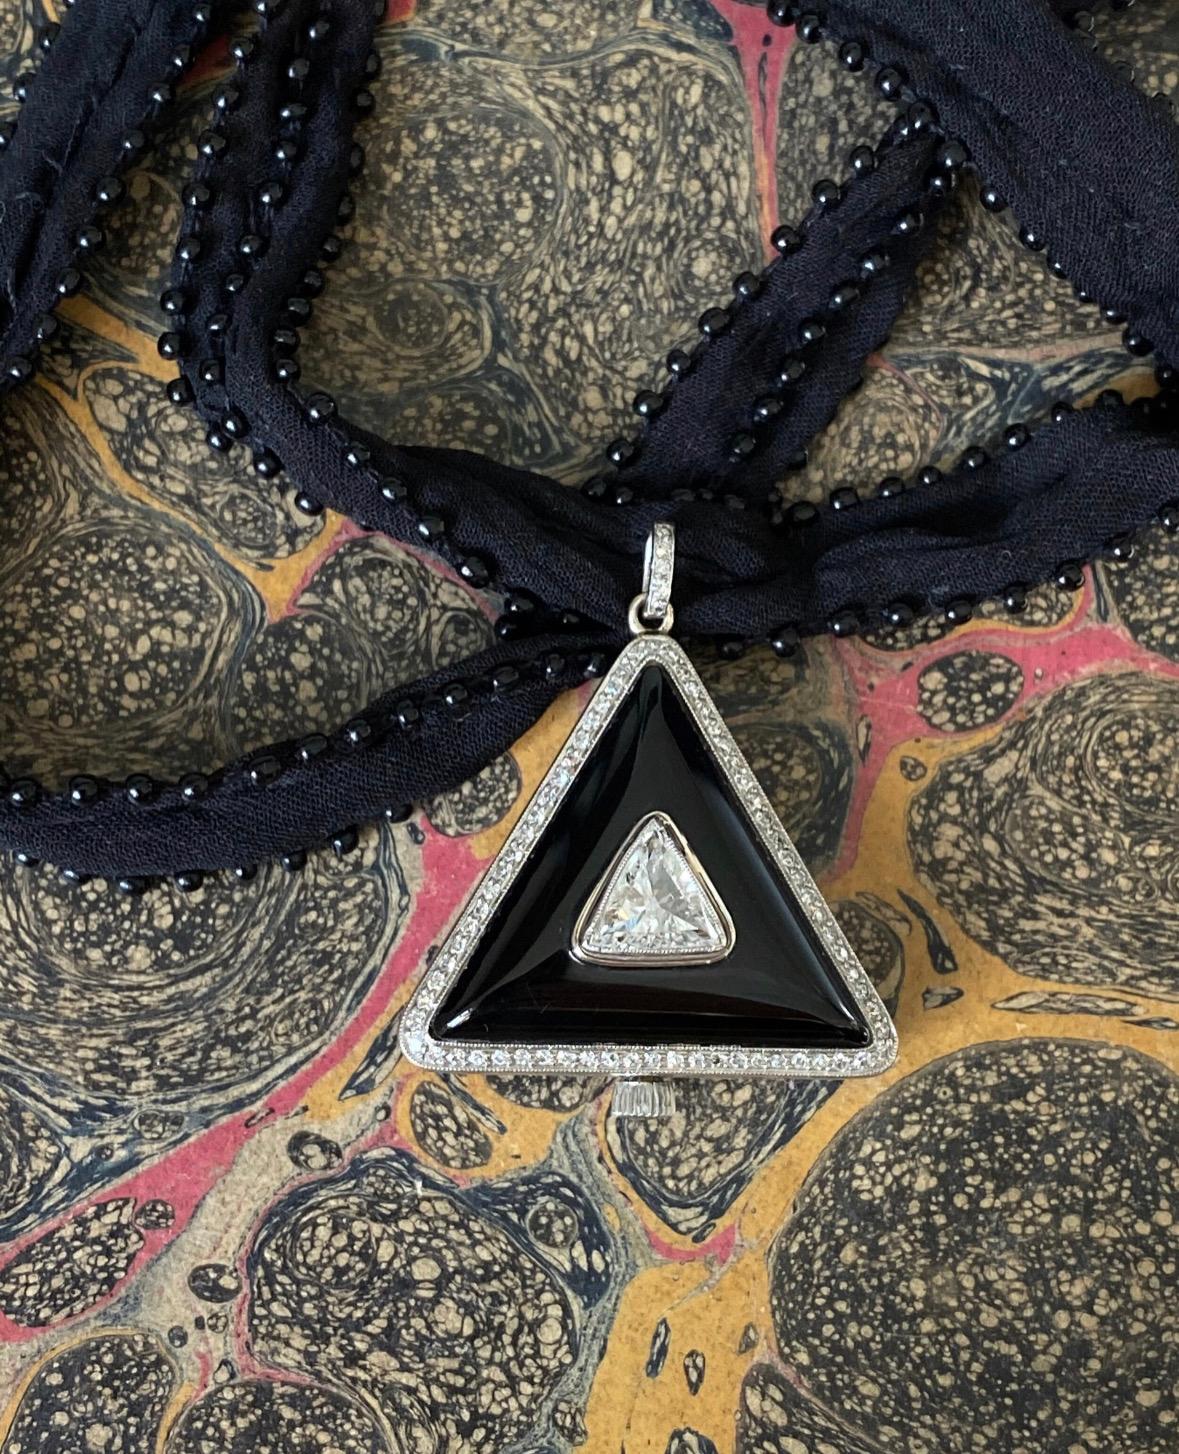 This sleek and striking Art Deco pendant watch centers on a sparkling triangular-cut diamond mounted within a domed glossy black onyx plaque framed in a border of single-cut diamonds. The watch boasts a silvered dial with black Roman numerals and